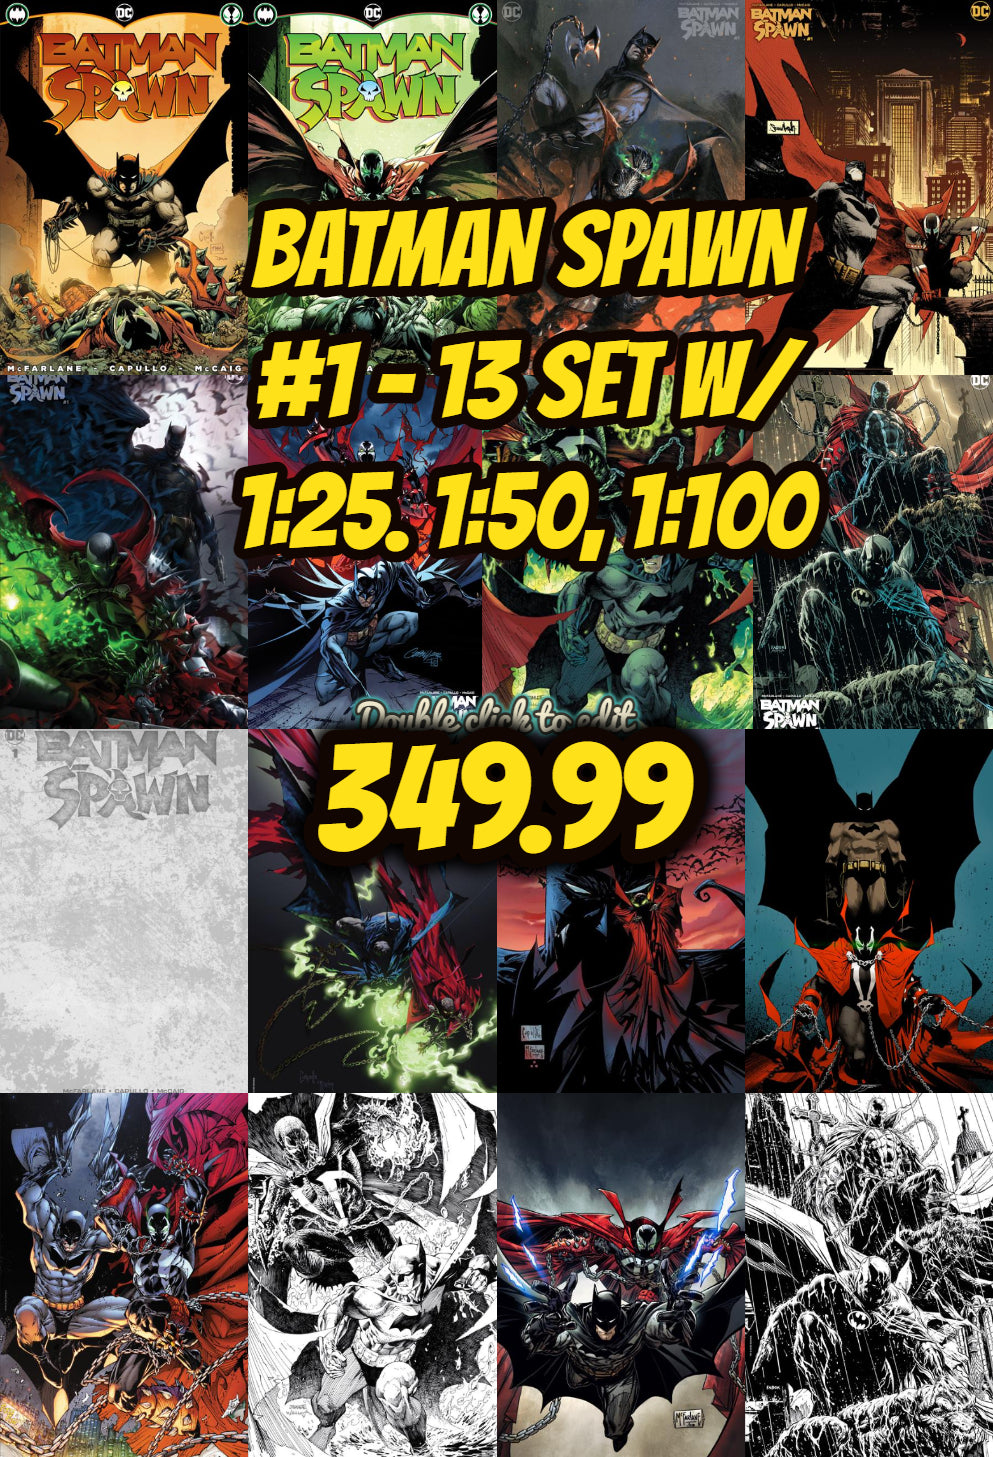 Batman Spawn #1 ALL 13 COVERS AND 1/25, 1/50, 1/100 RATIO SET.